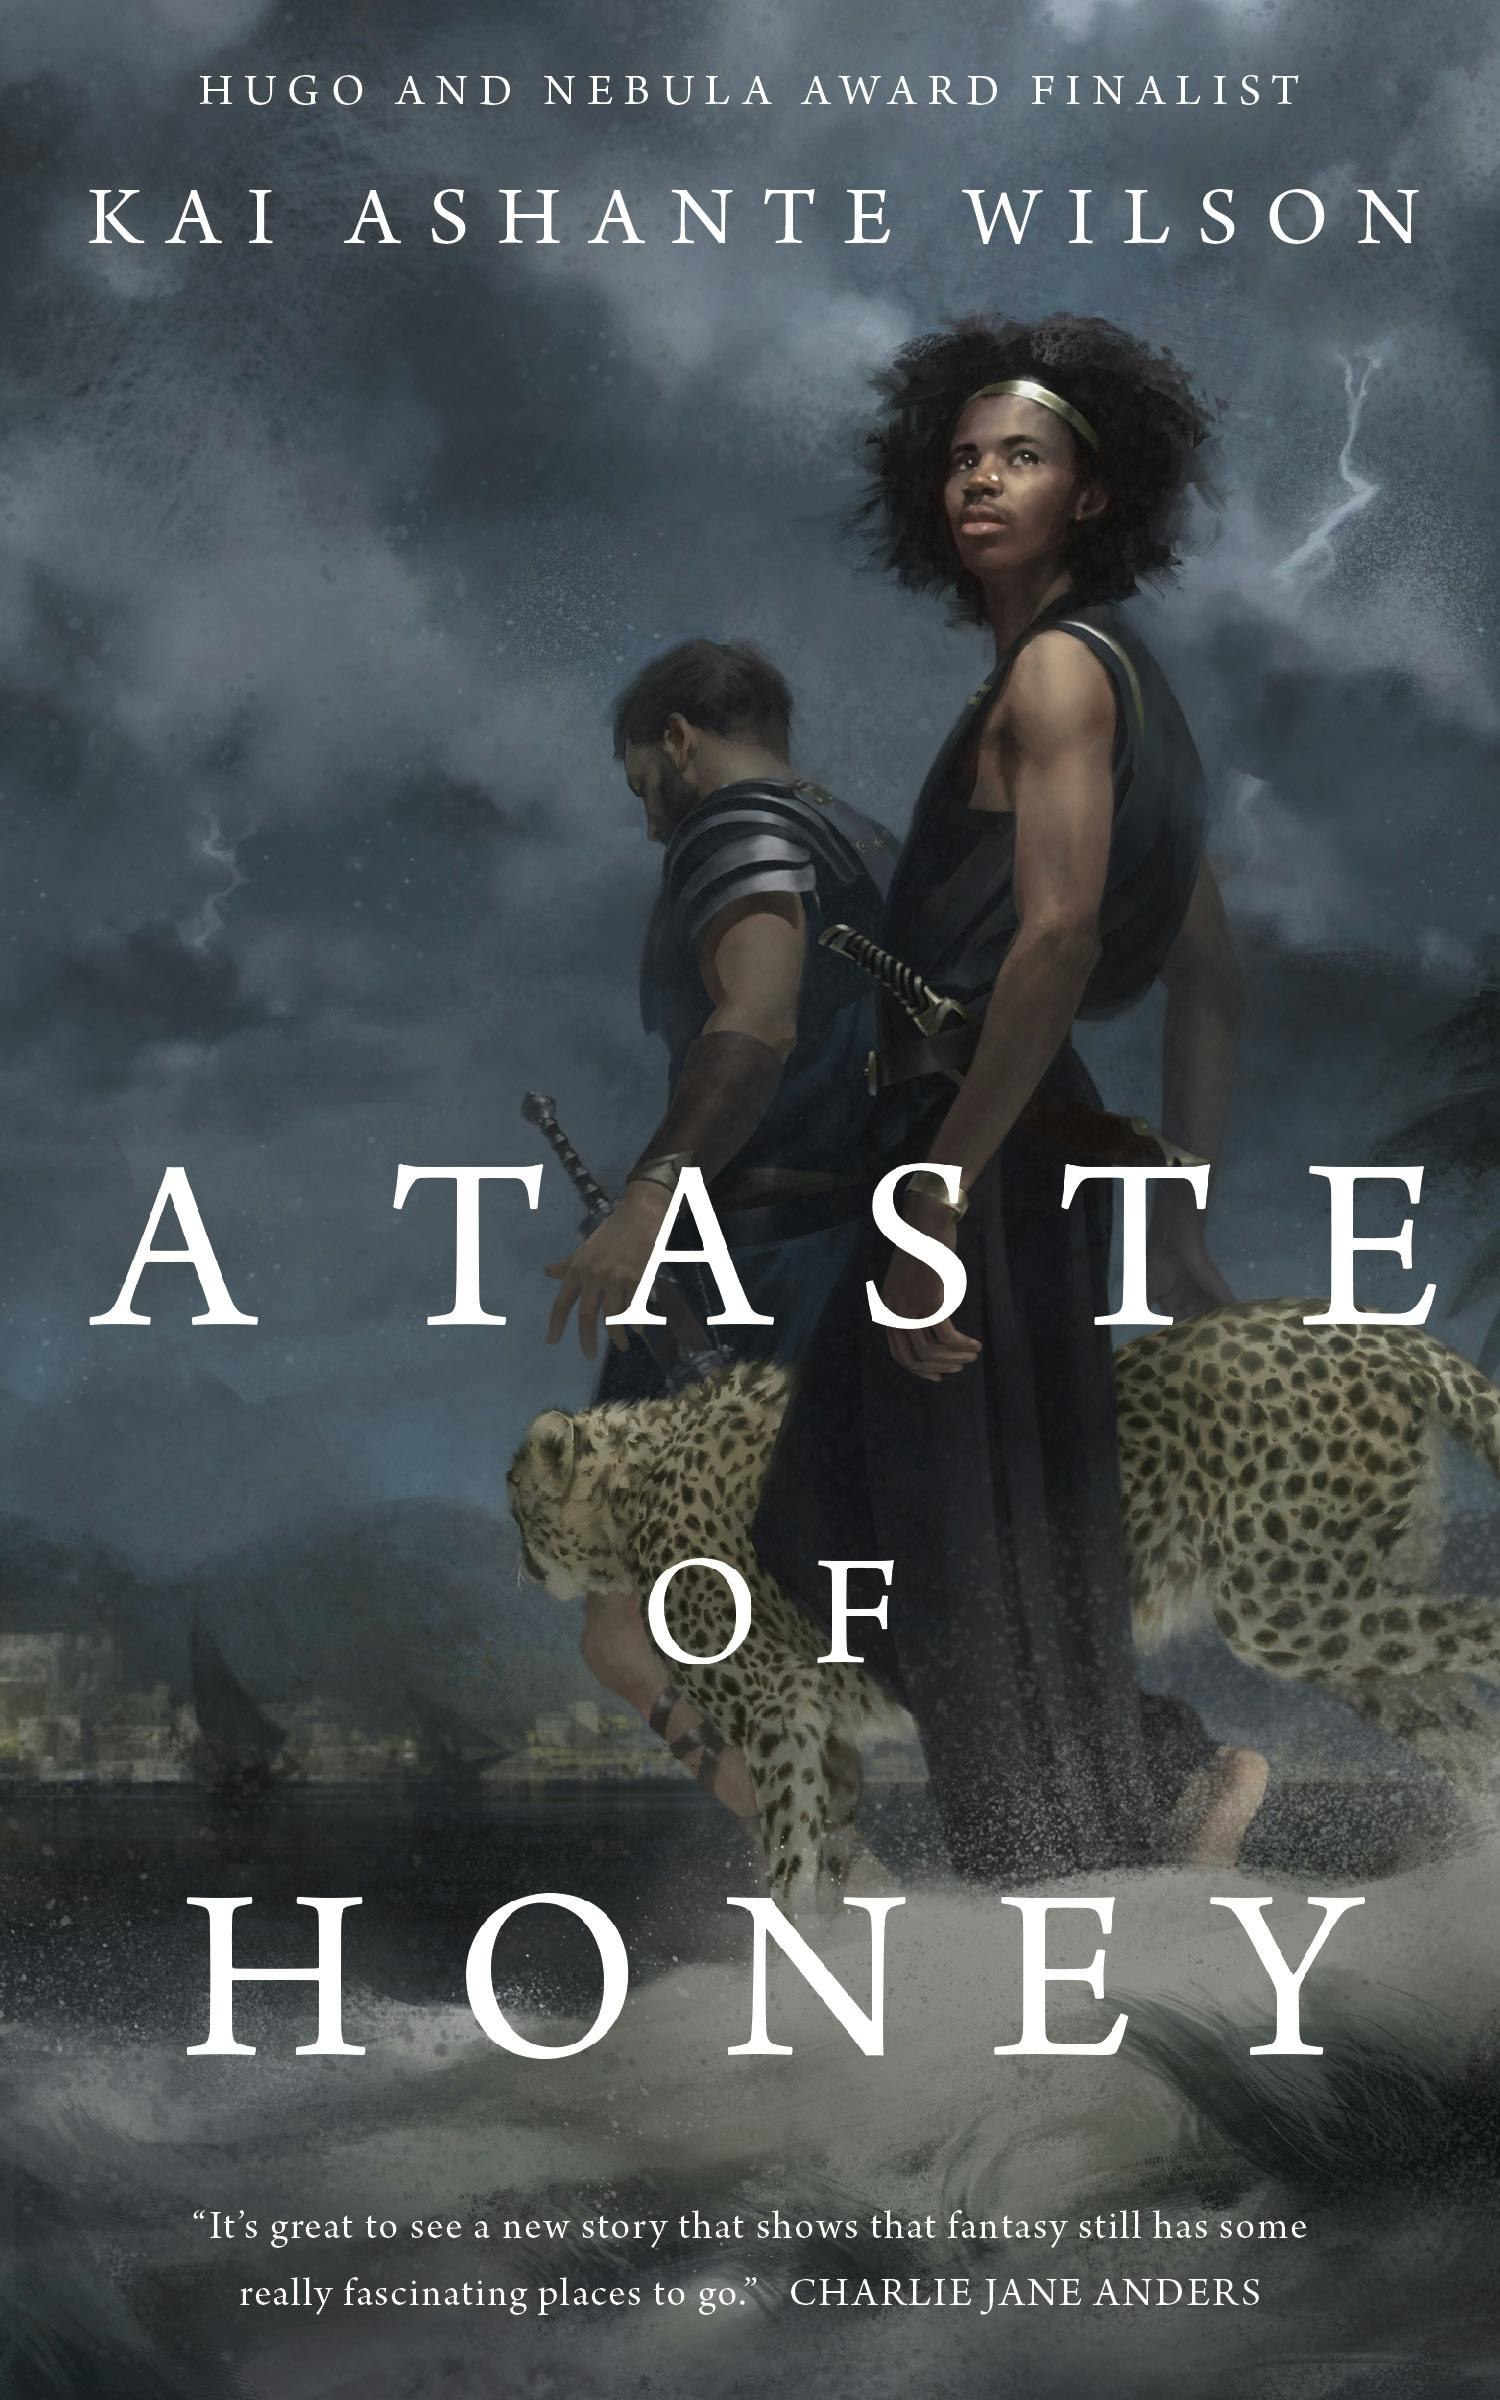 Cover for the book titled as: A Taste of Honey